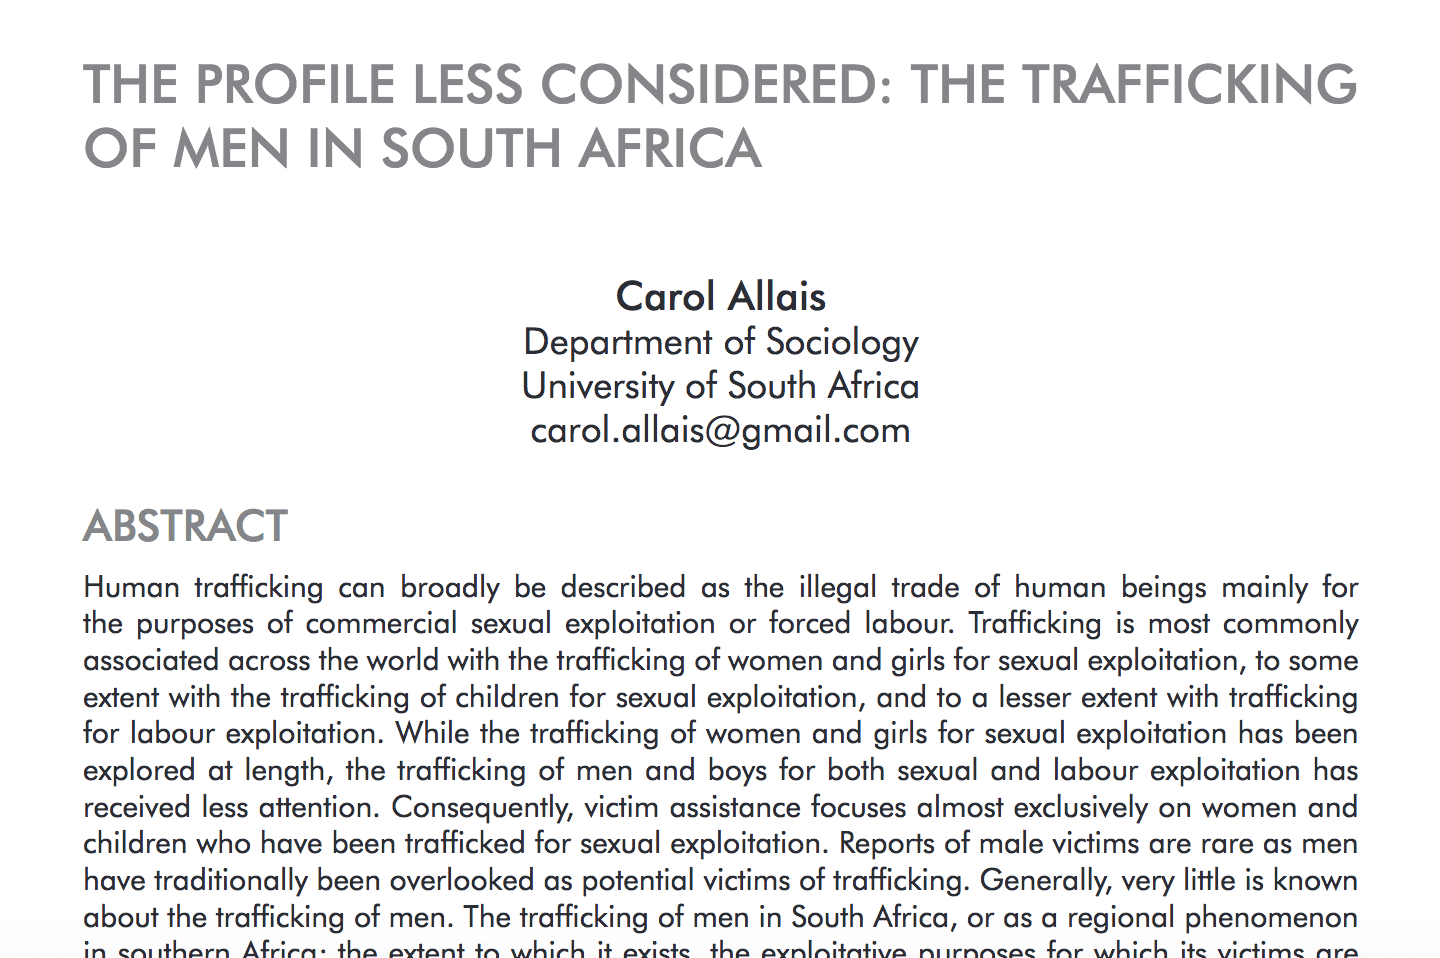 The profile less considered: The trafficking of men in South Africa